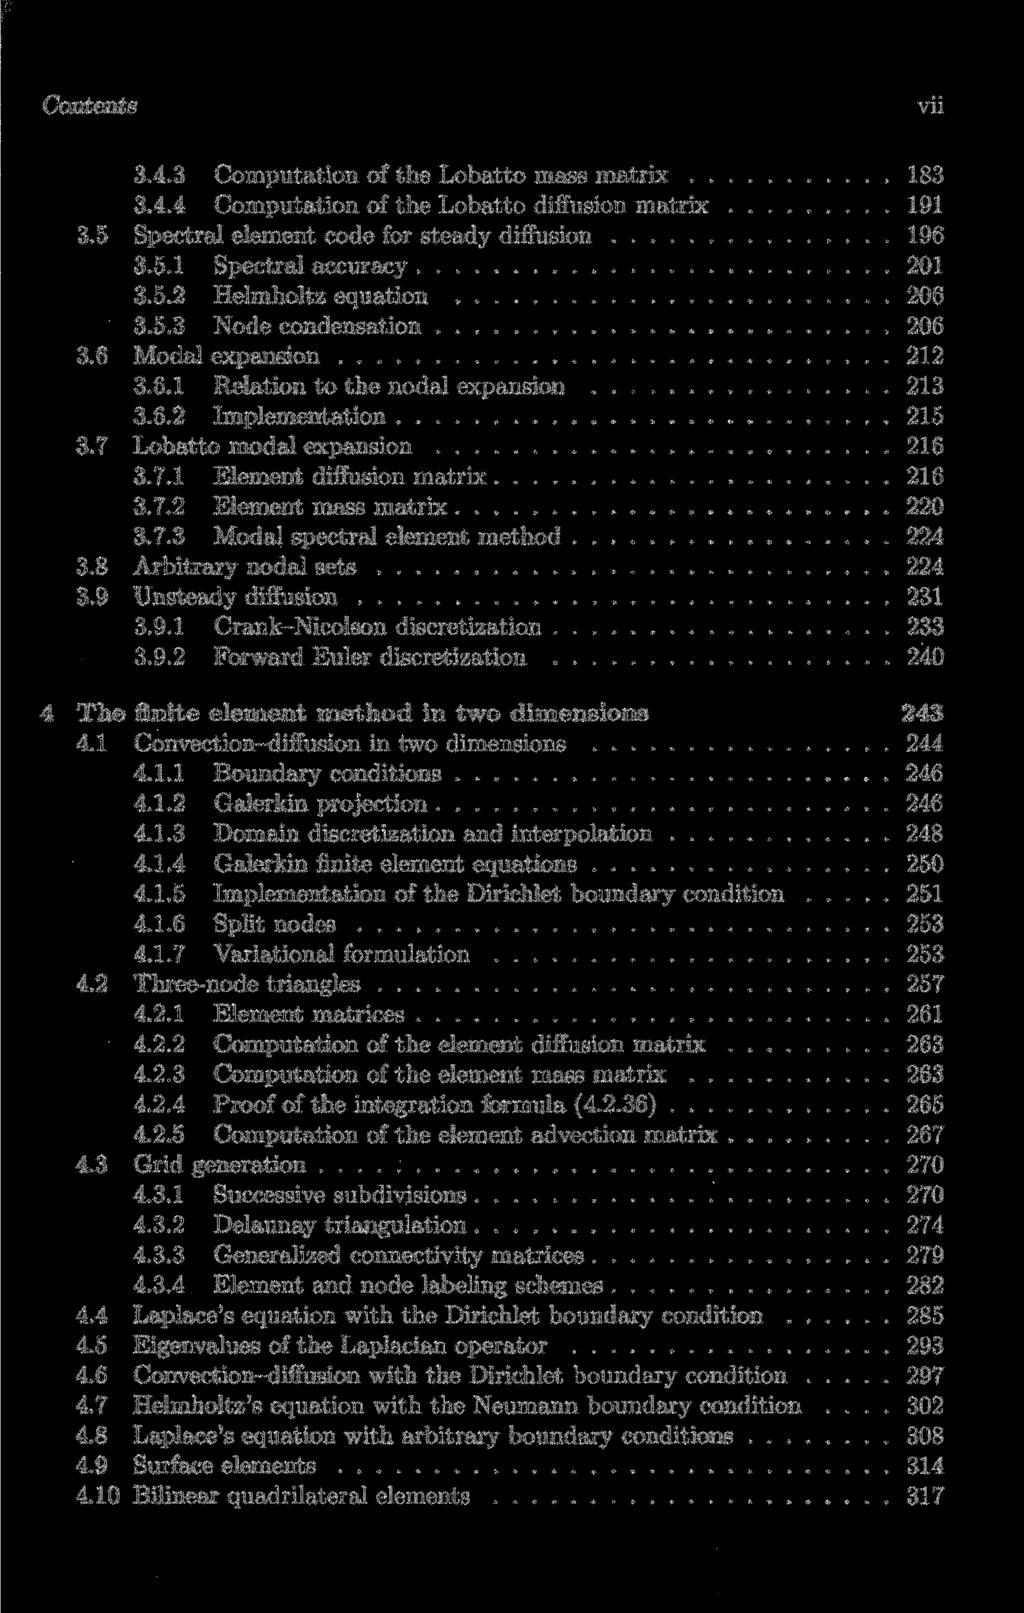 Contents vii 3.4.3 Computation of the Lobatto mass matrix 183 3.4.4 Computation of the Lobatto diffusion matrix 191 3.5 Spectral element code for steady diffusion 196 3.5.1 Spectral accuracy 201 3.5.2 Helmholtz equation 206 3.